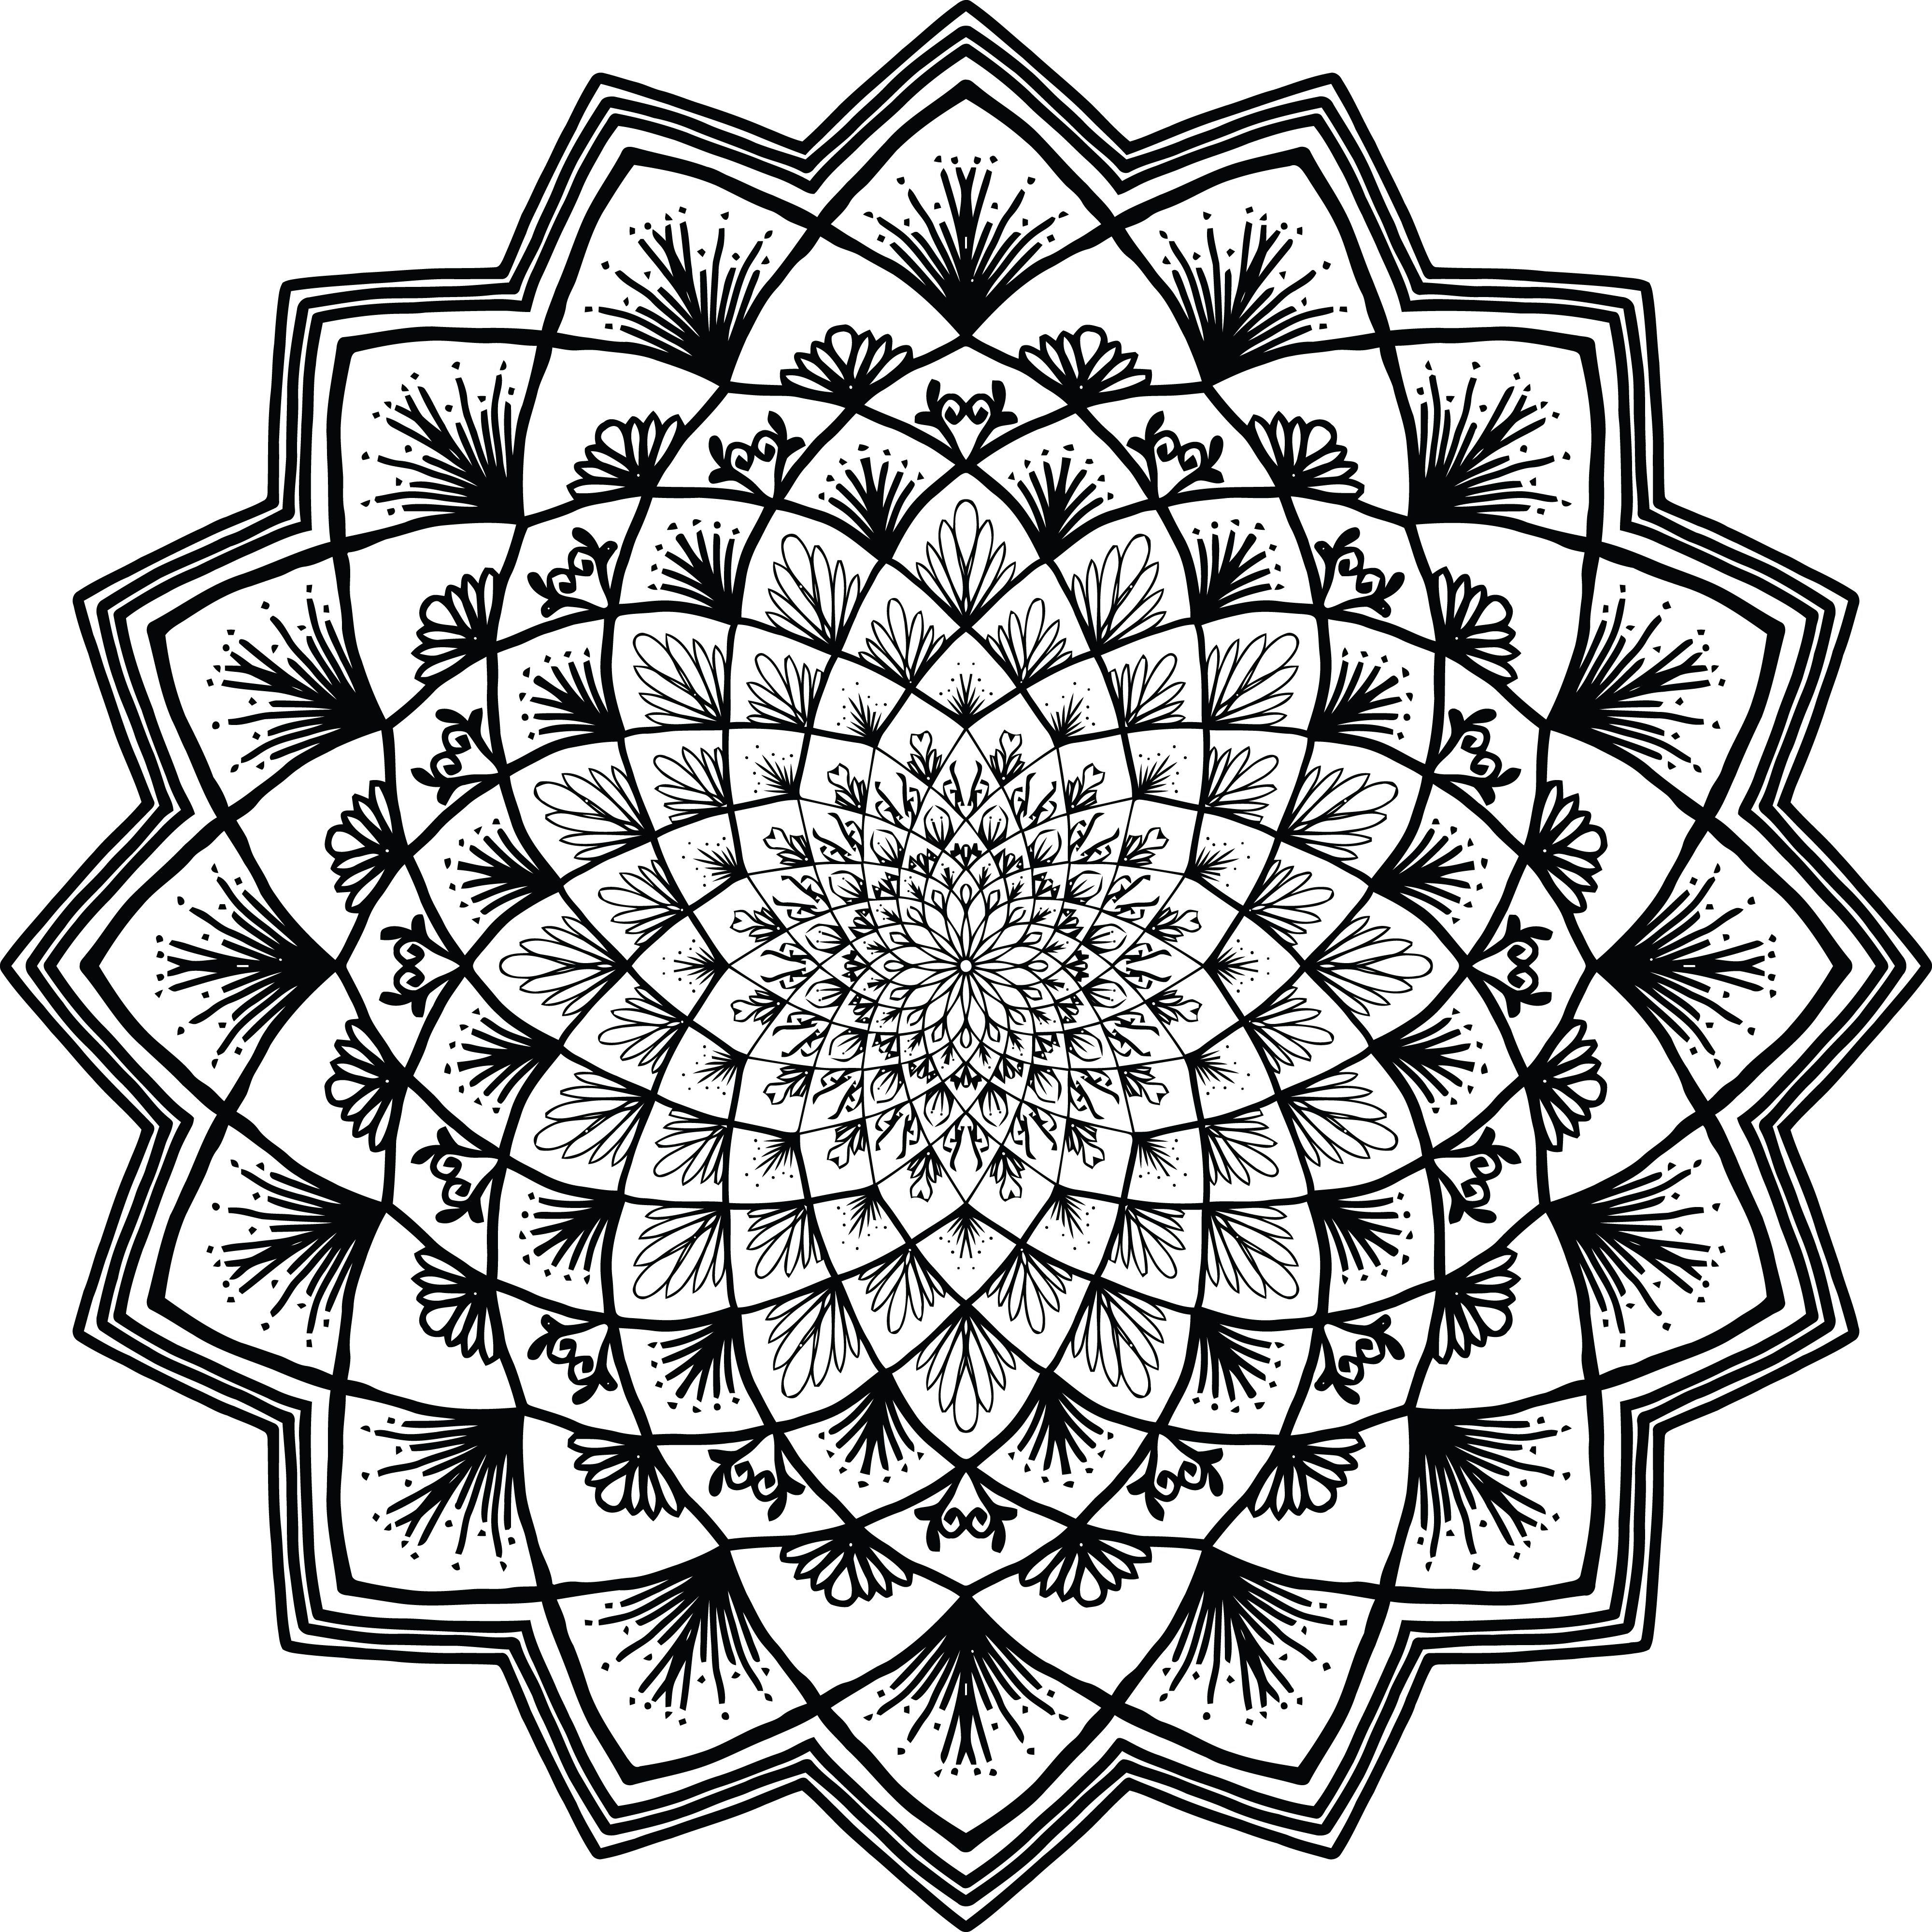 Download Free Clipart Of A black and white adult coloring page ...